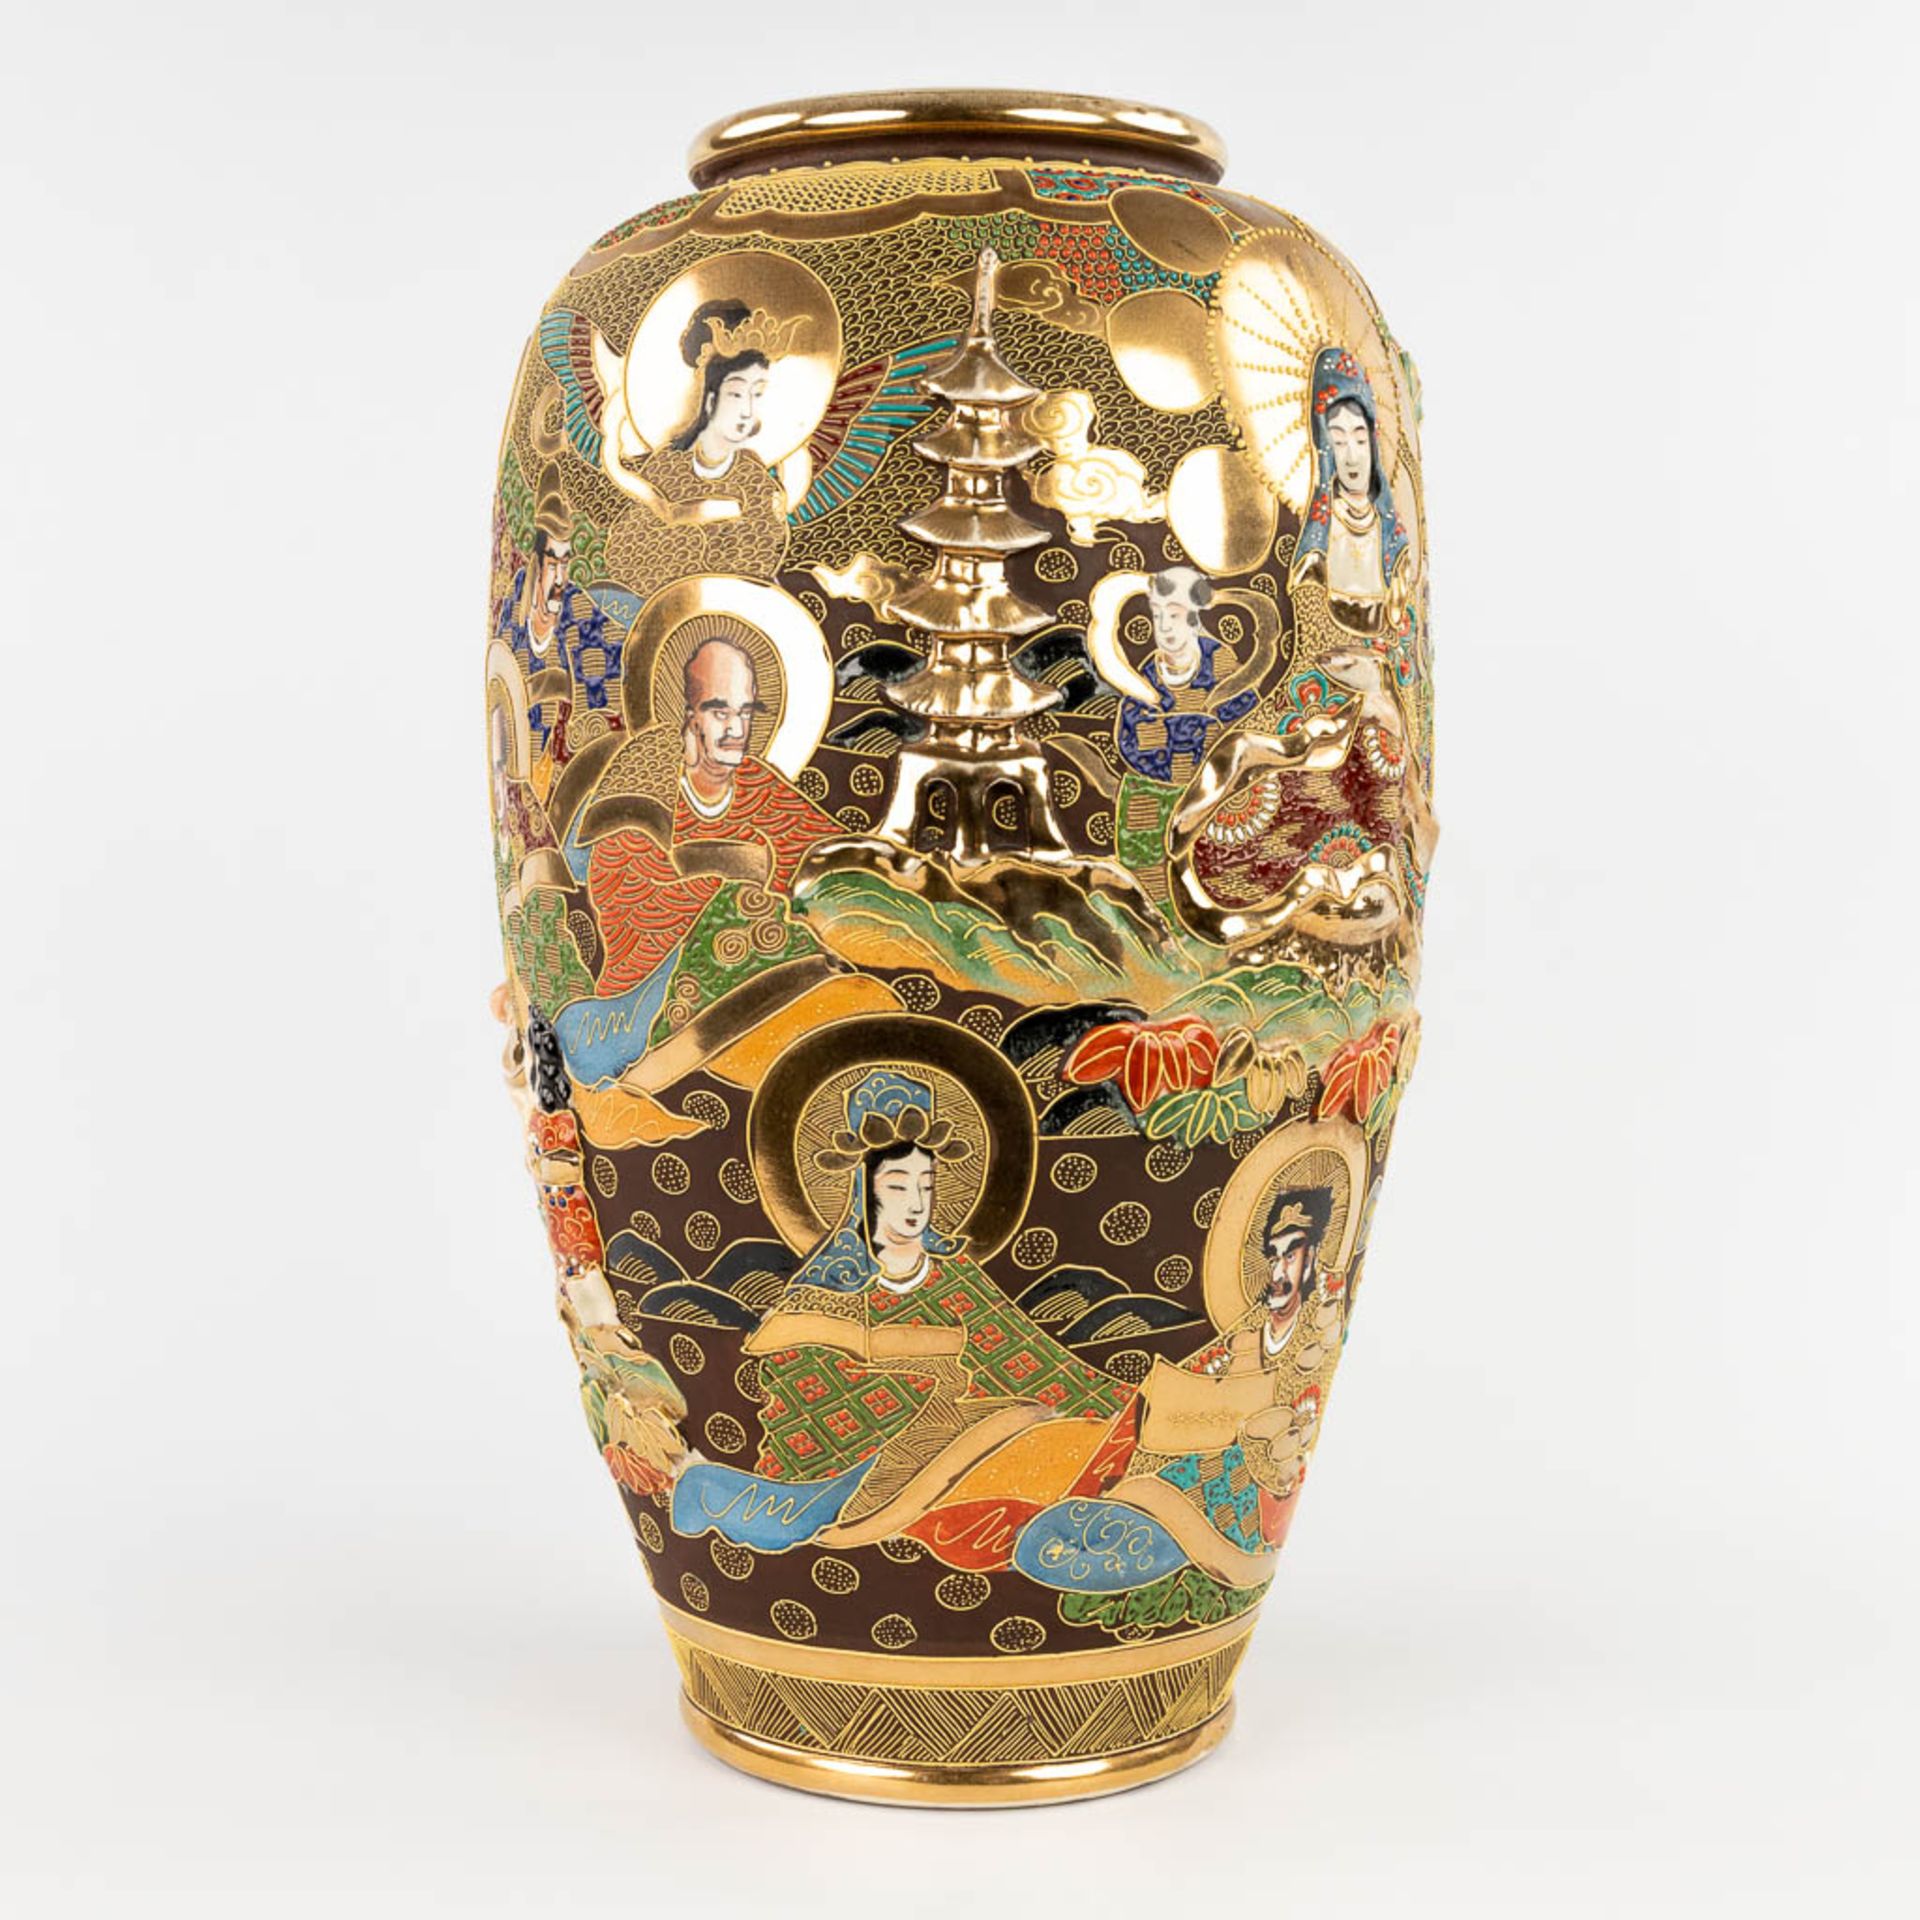 A large vase, Satsuma faience decorated with men and ladies, Japan. 20th C. (H:48 x D:28 cm)